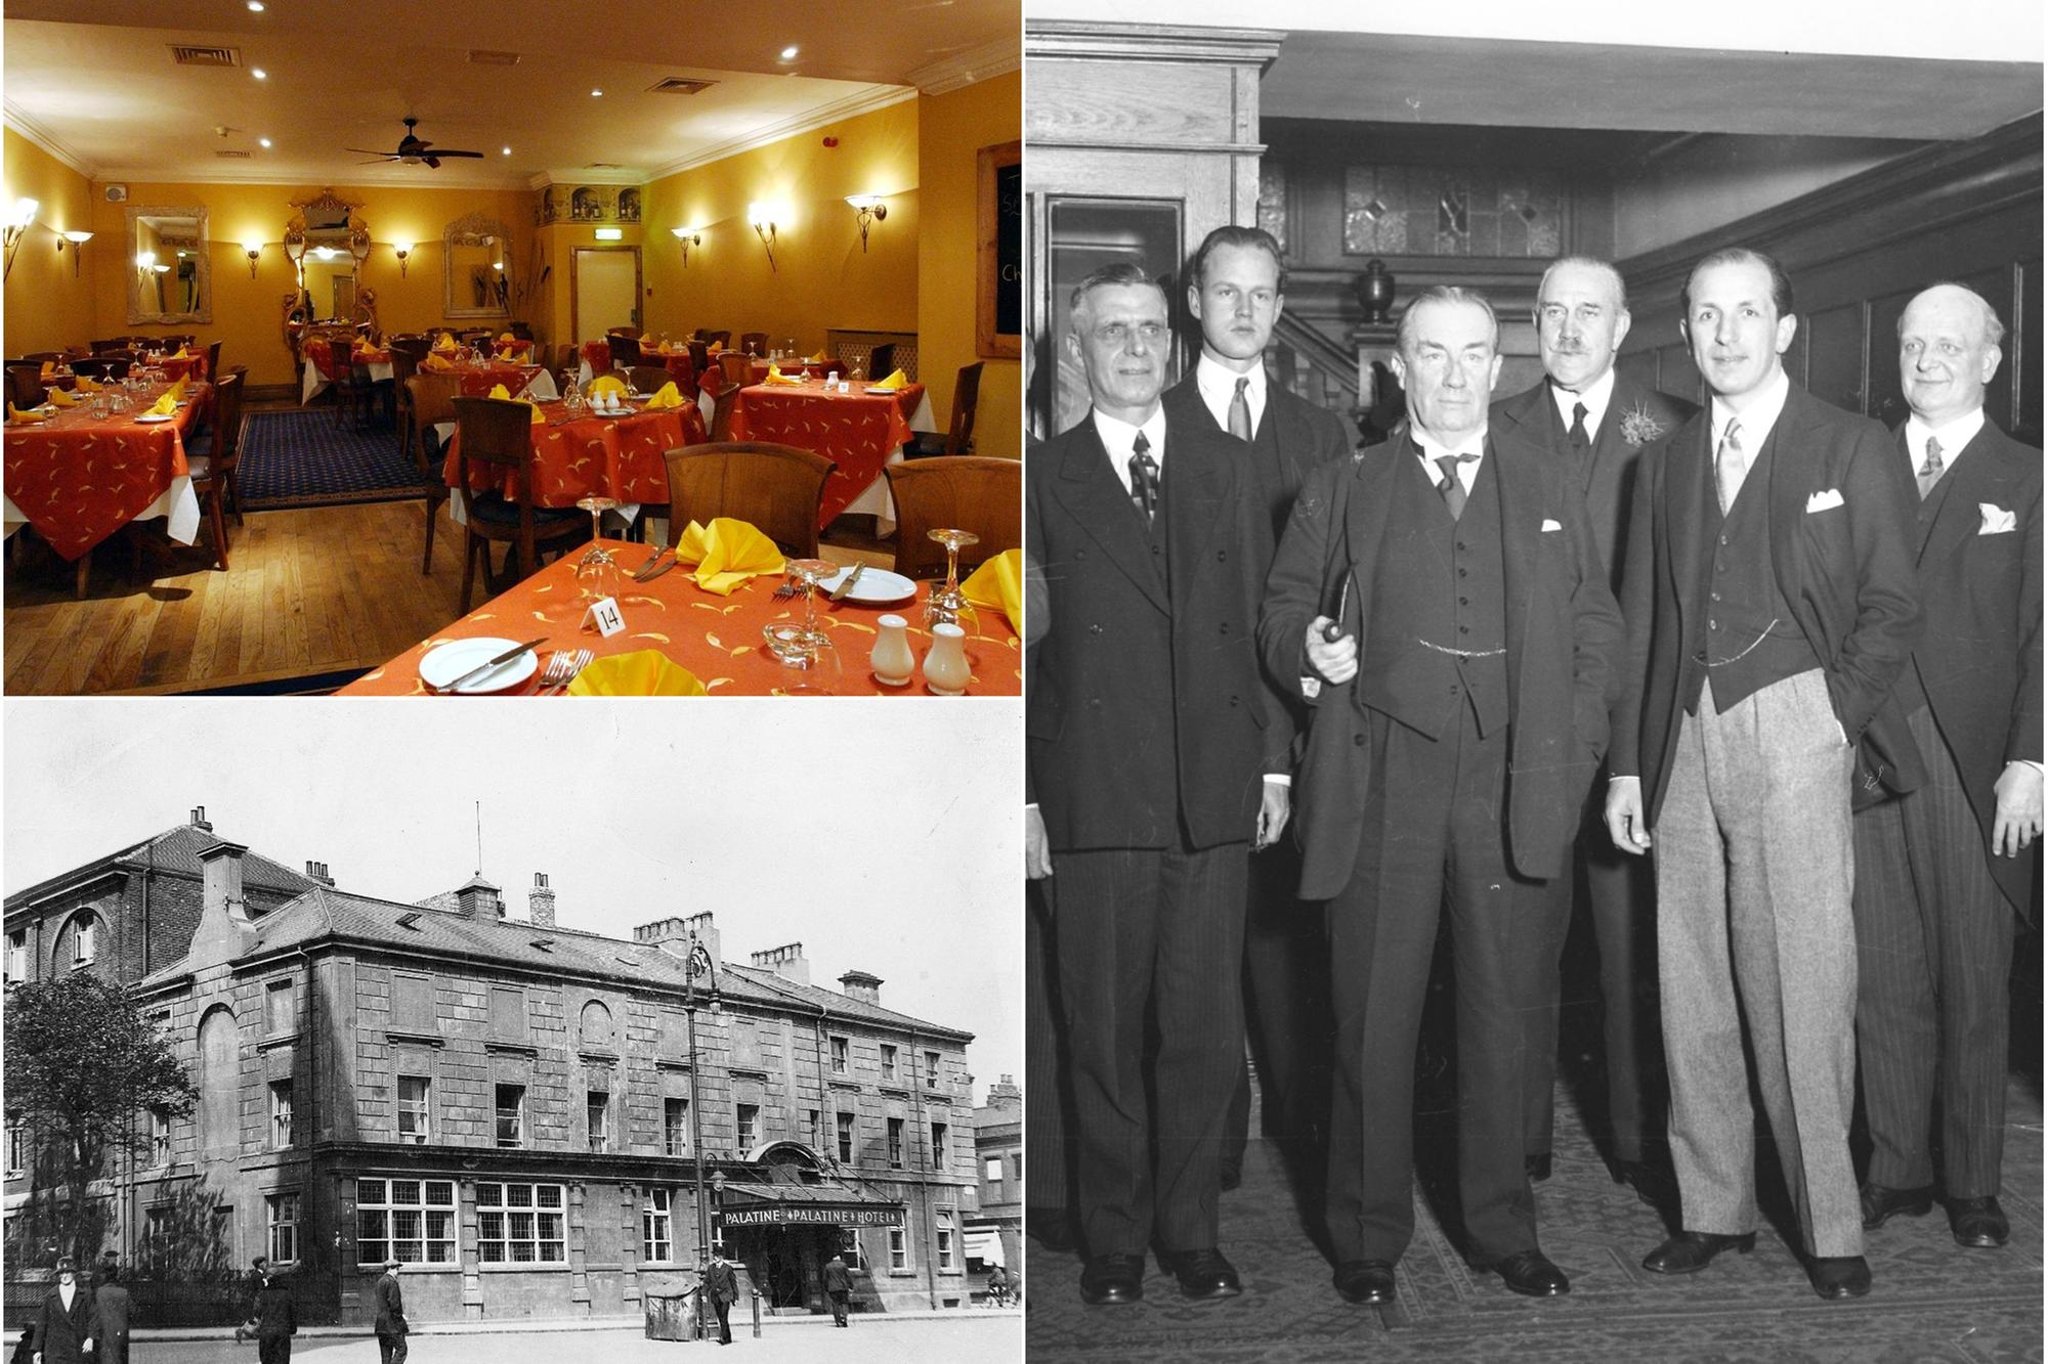 Remembering the Sunderland’s Mowbray Park Hotel, the hostelry with 165 years history that had ‘every convenience’ you could want